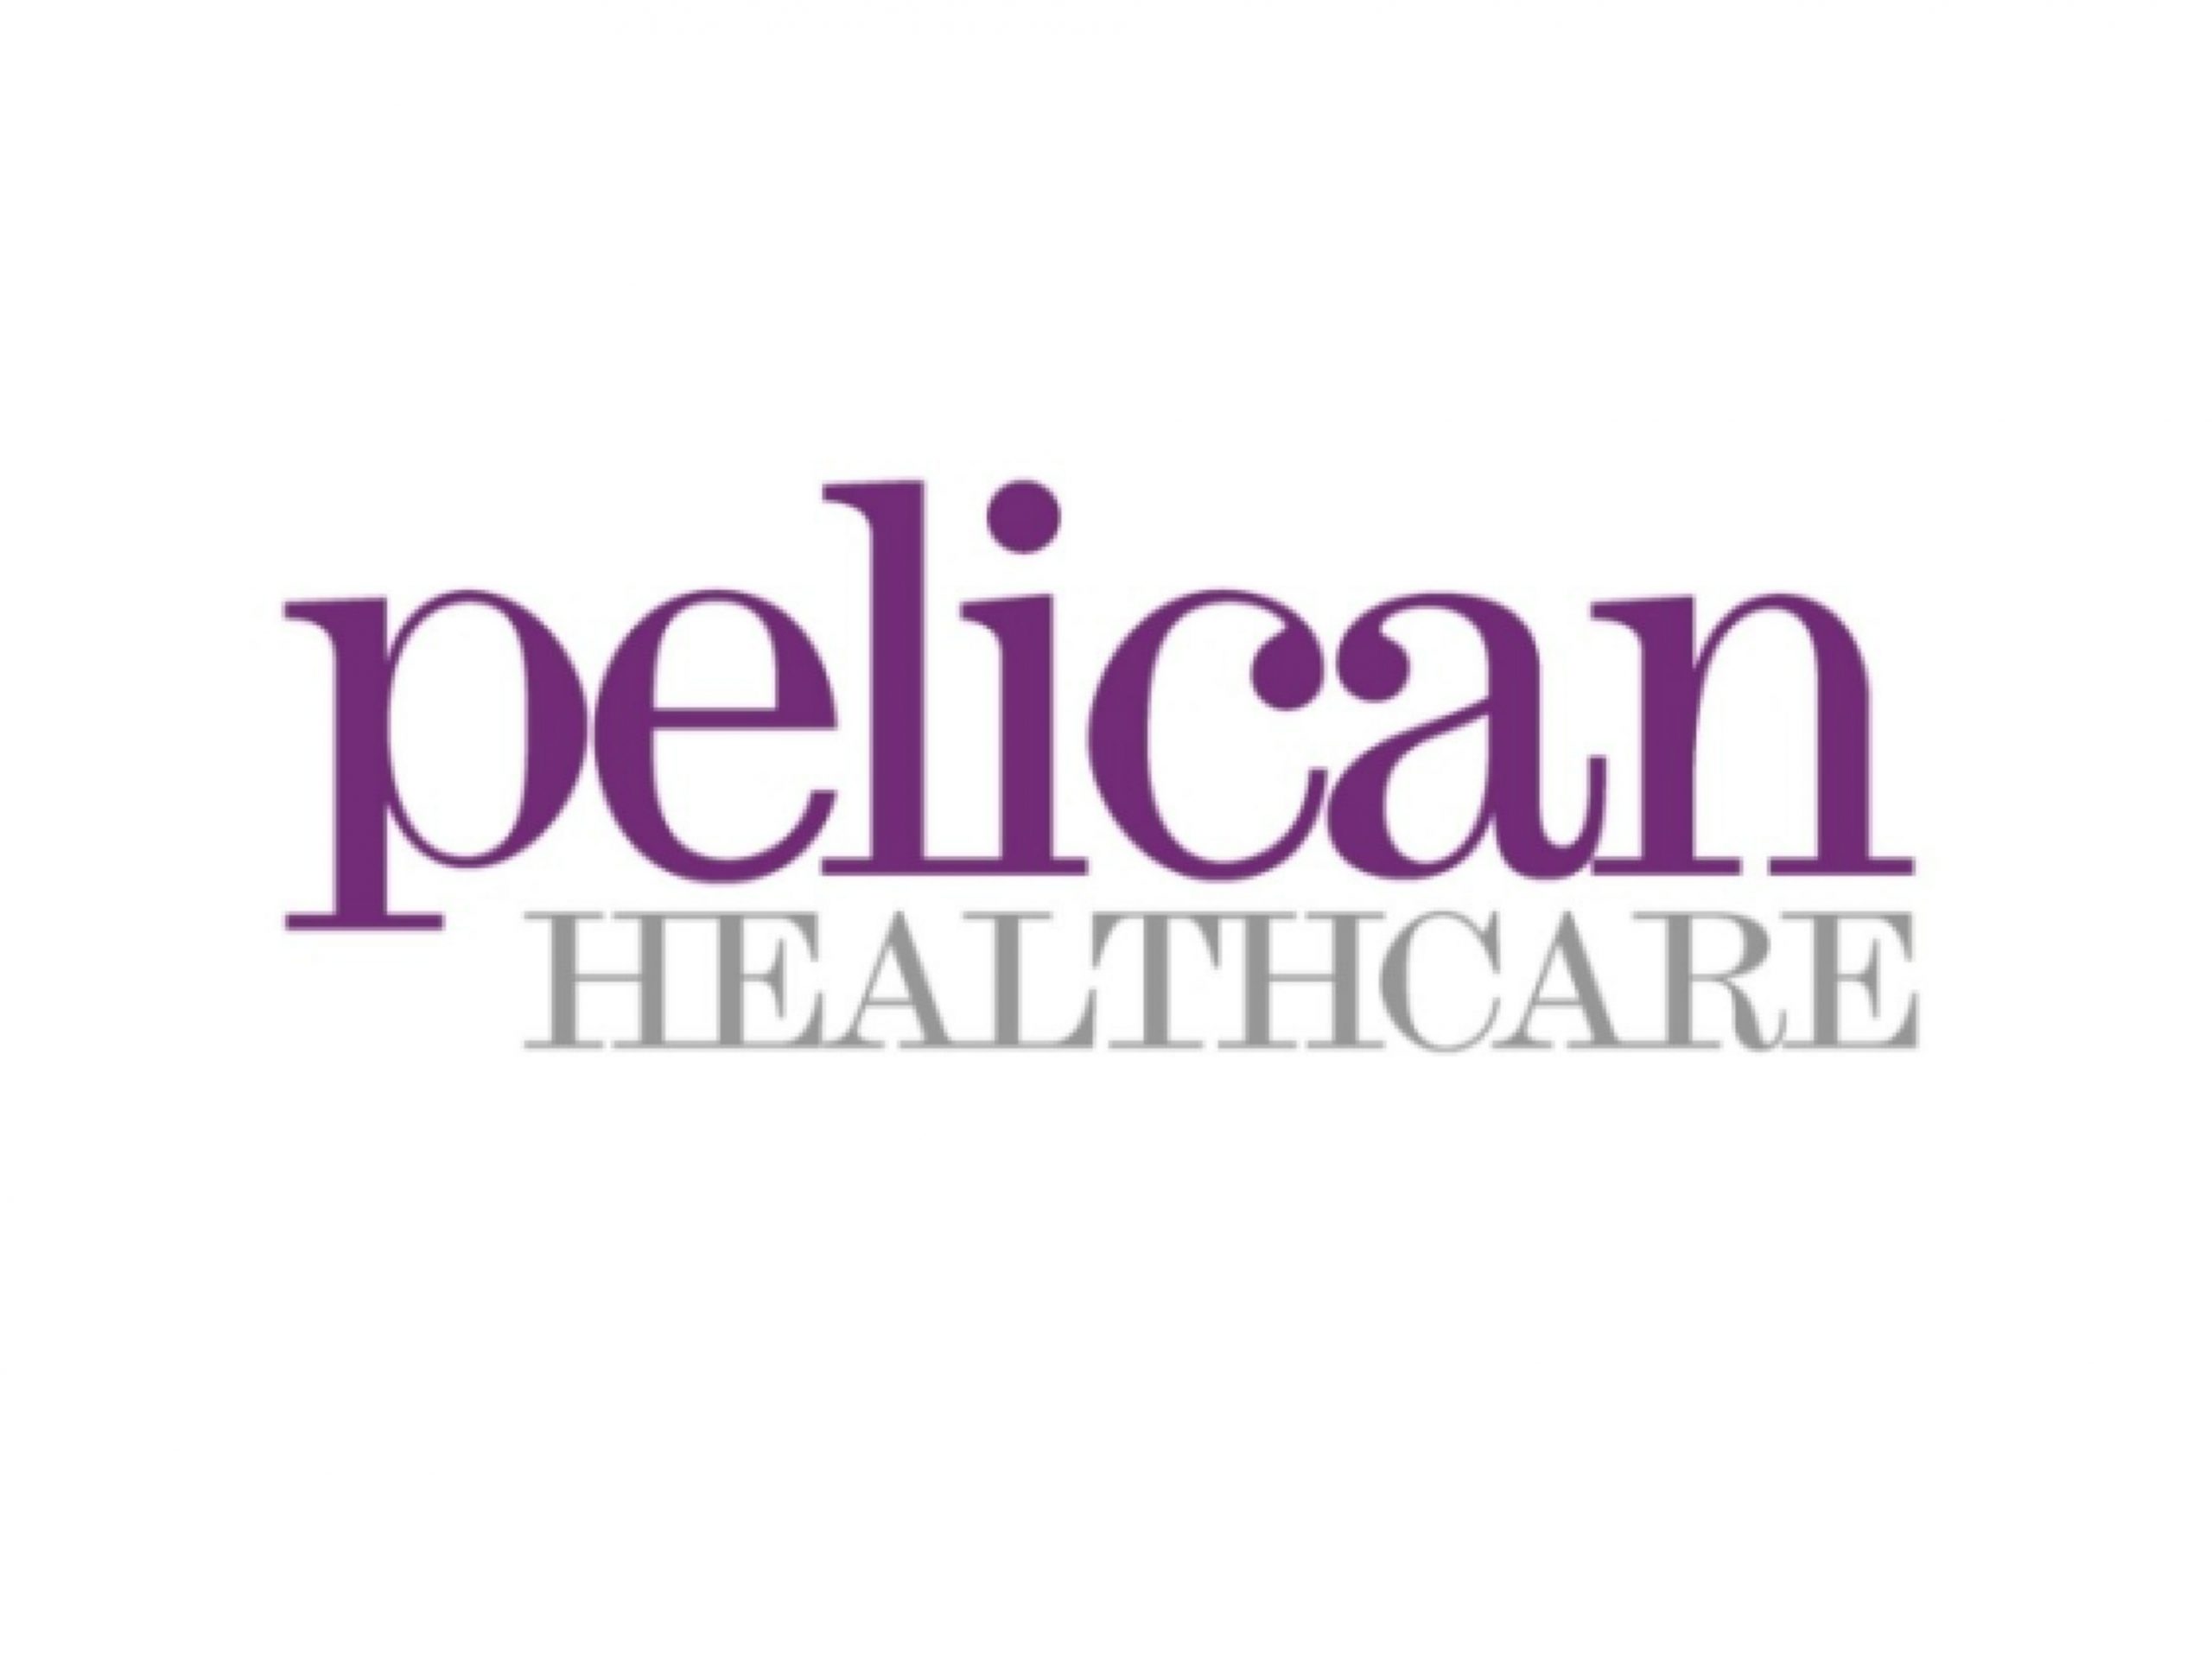 Pelican Healthcare launches new Stoma product